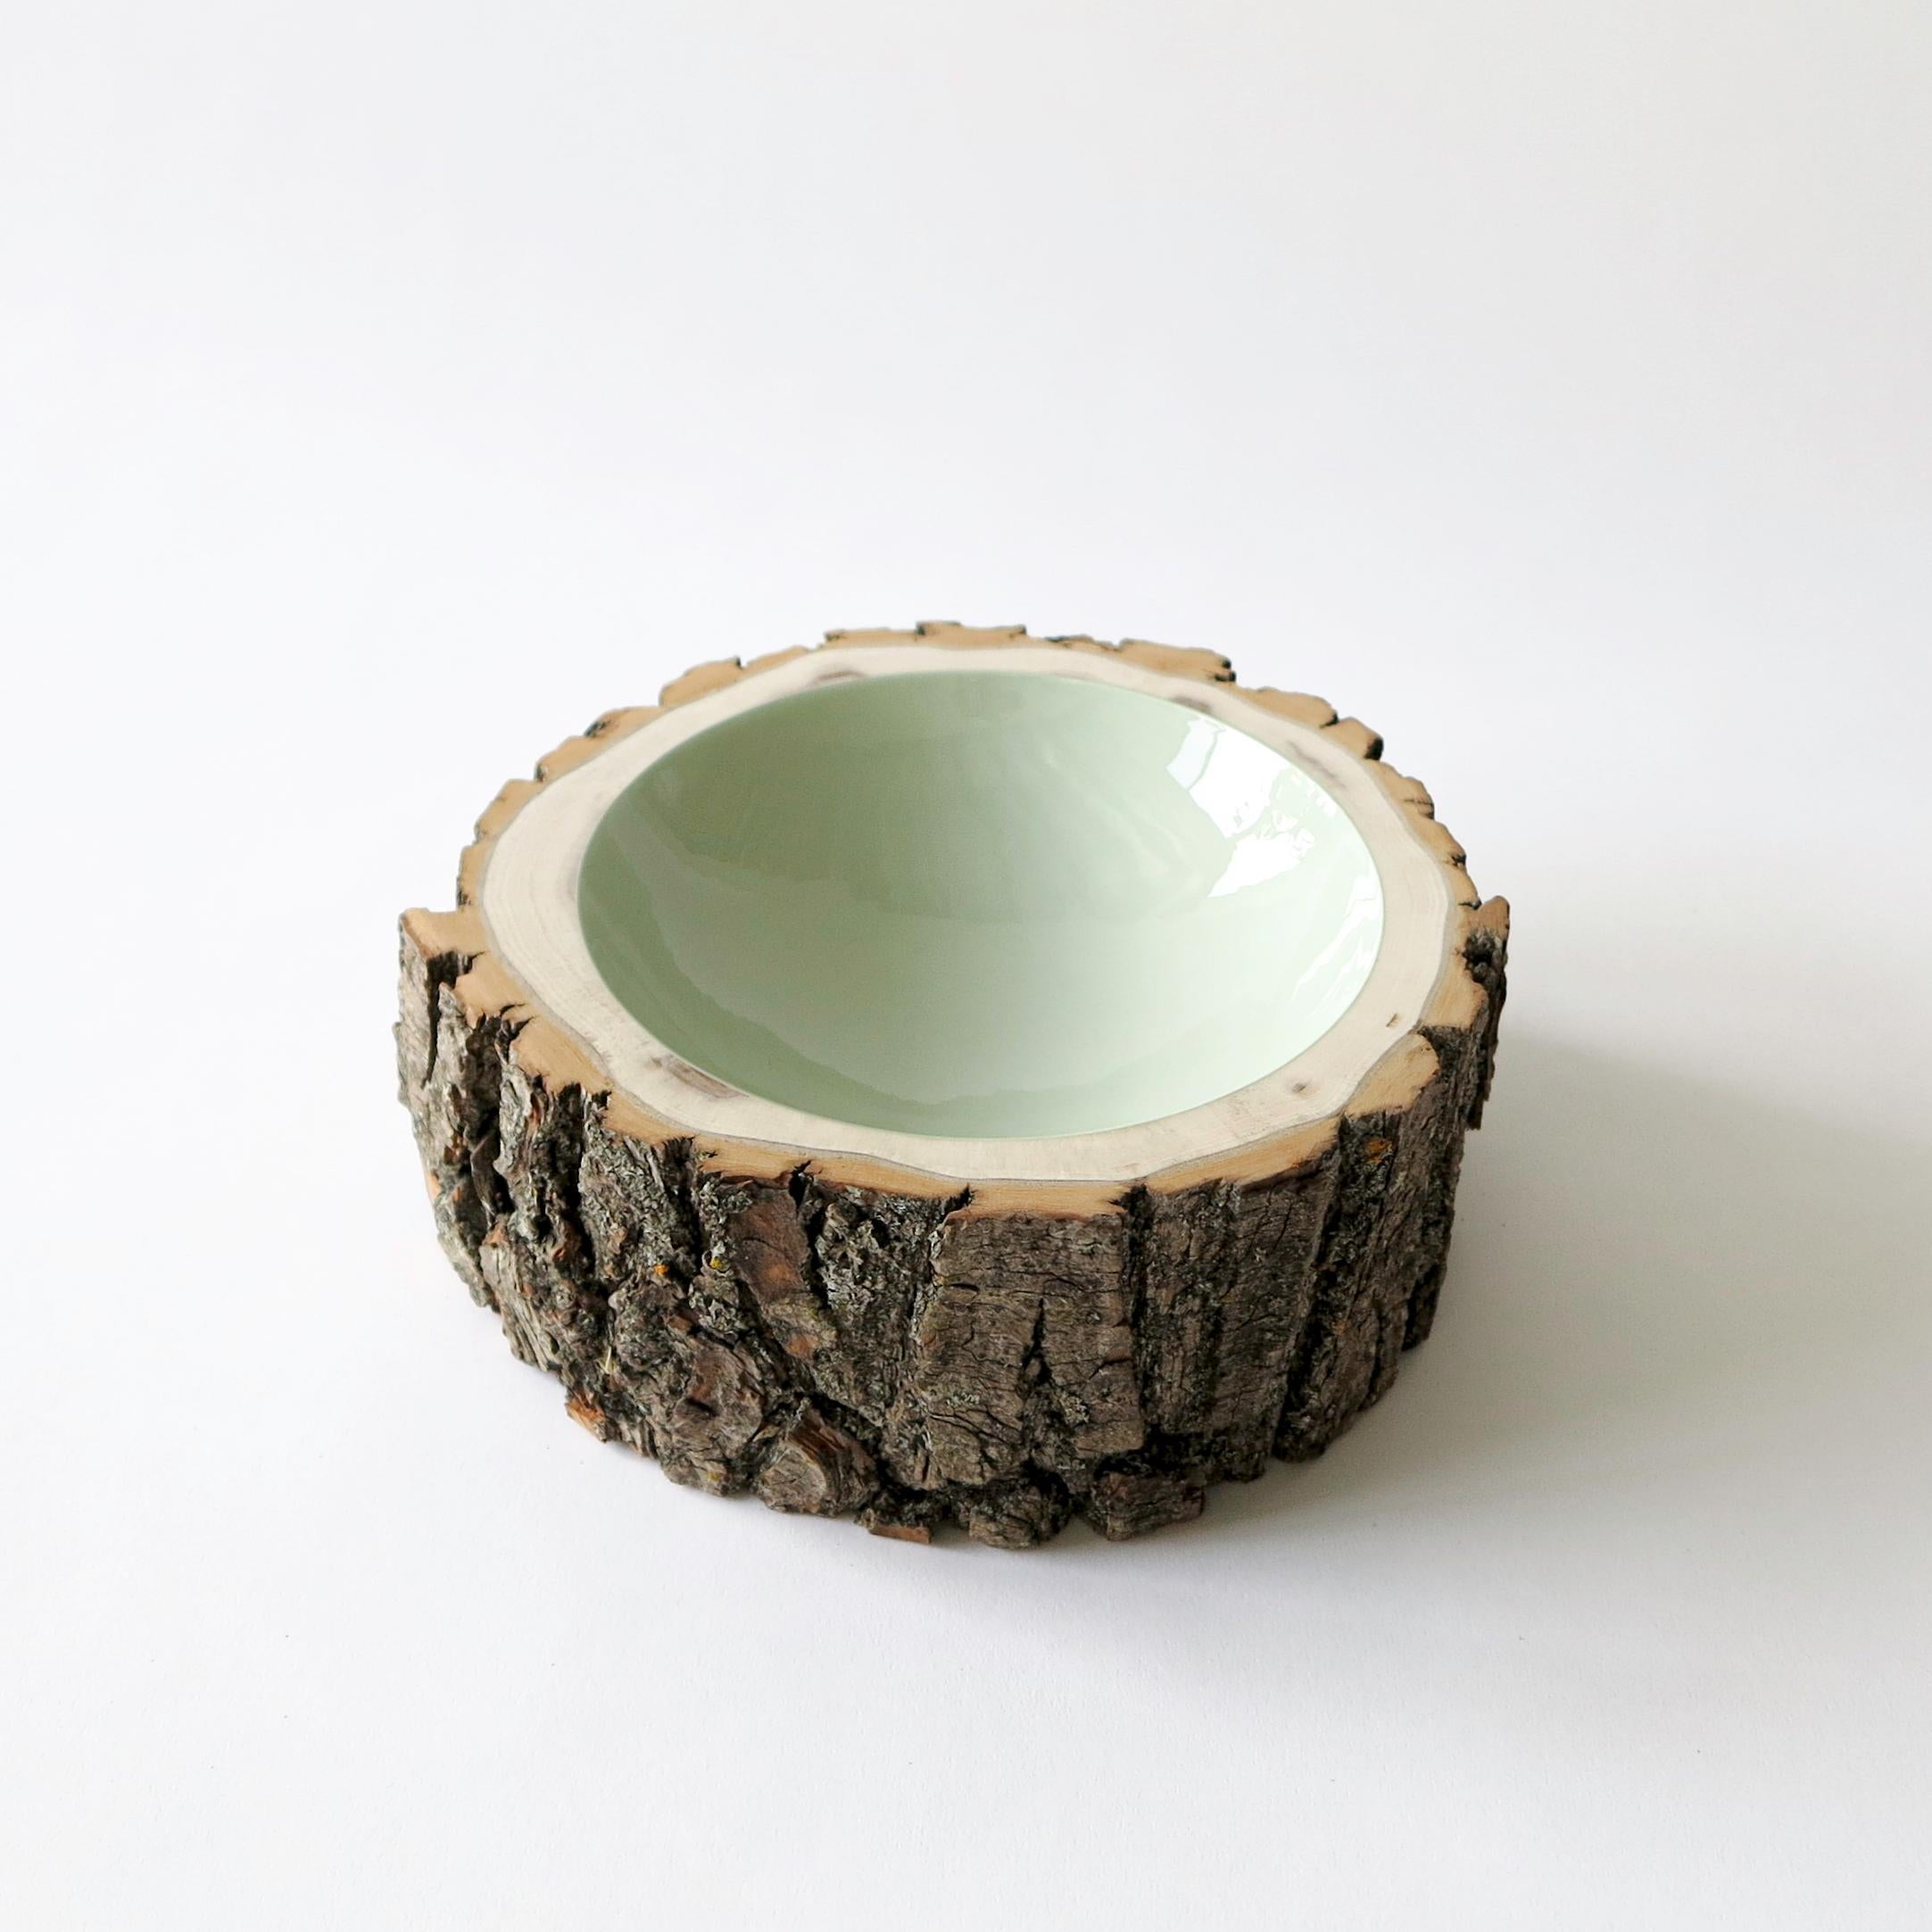 Perfect as a feature objet d'art on your table or shelves, a catch-all for jewellery and special items, or displayed as a group for a striking centrepiece. 
Each Log Bowl is unique and makes the perfect one of a kind gift.

Log bowls combine the